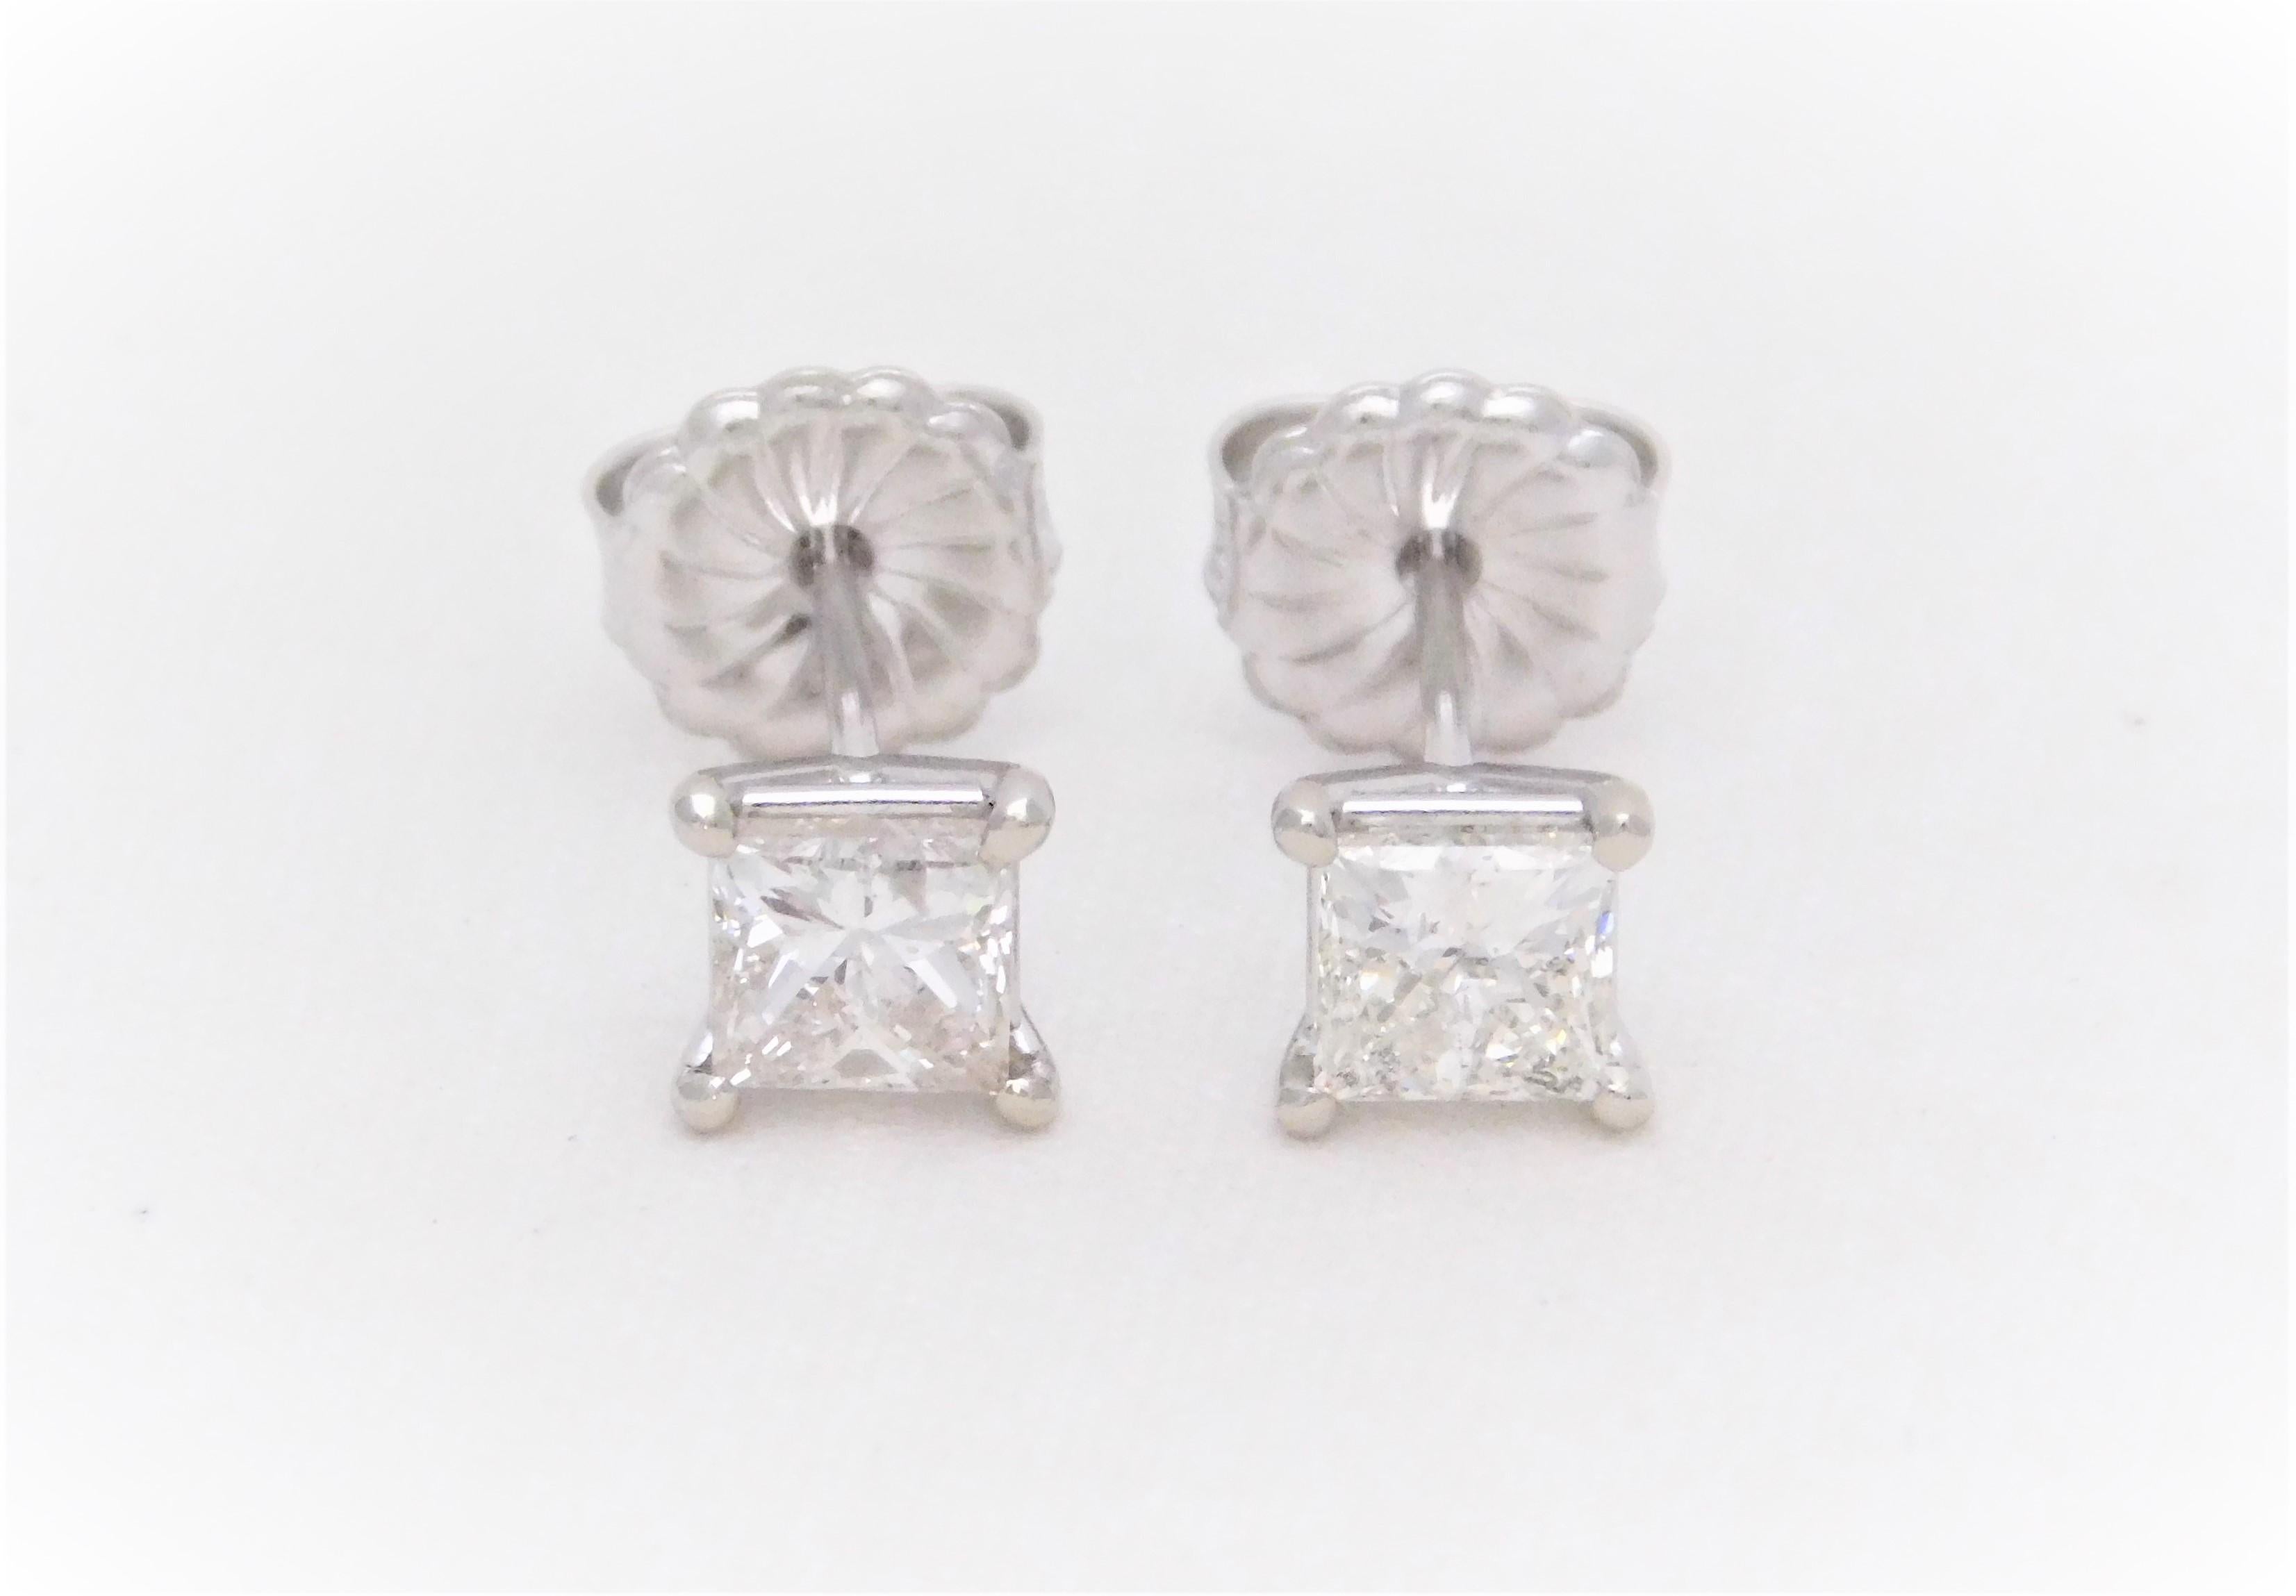 1.26 Carat Princess-Cut Diamond Stud Earrings in 18k White Gold
Brand New and never worn.  These bright and sparkling stud-style earrings have been crafted in solid 18k White Gold.  Each earring has been masterfully jeweled, in a 4-prong cocktail